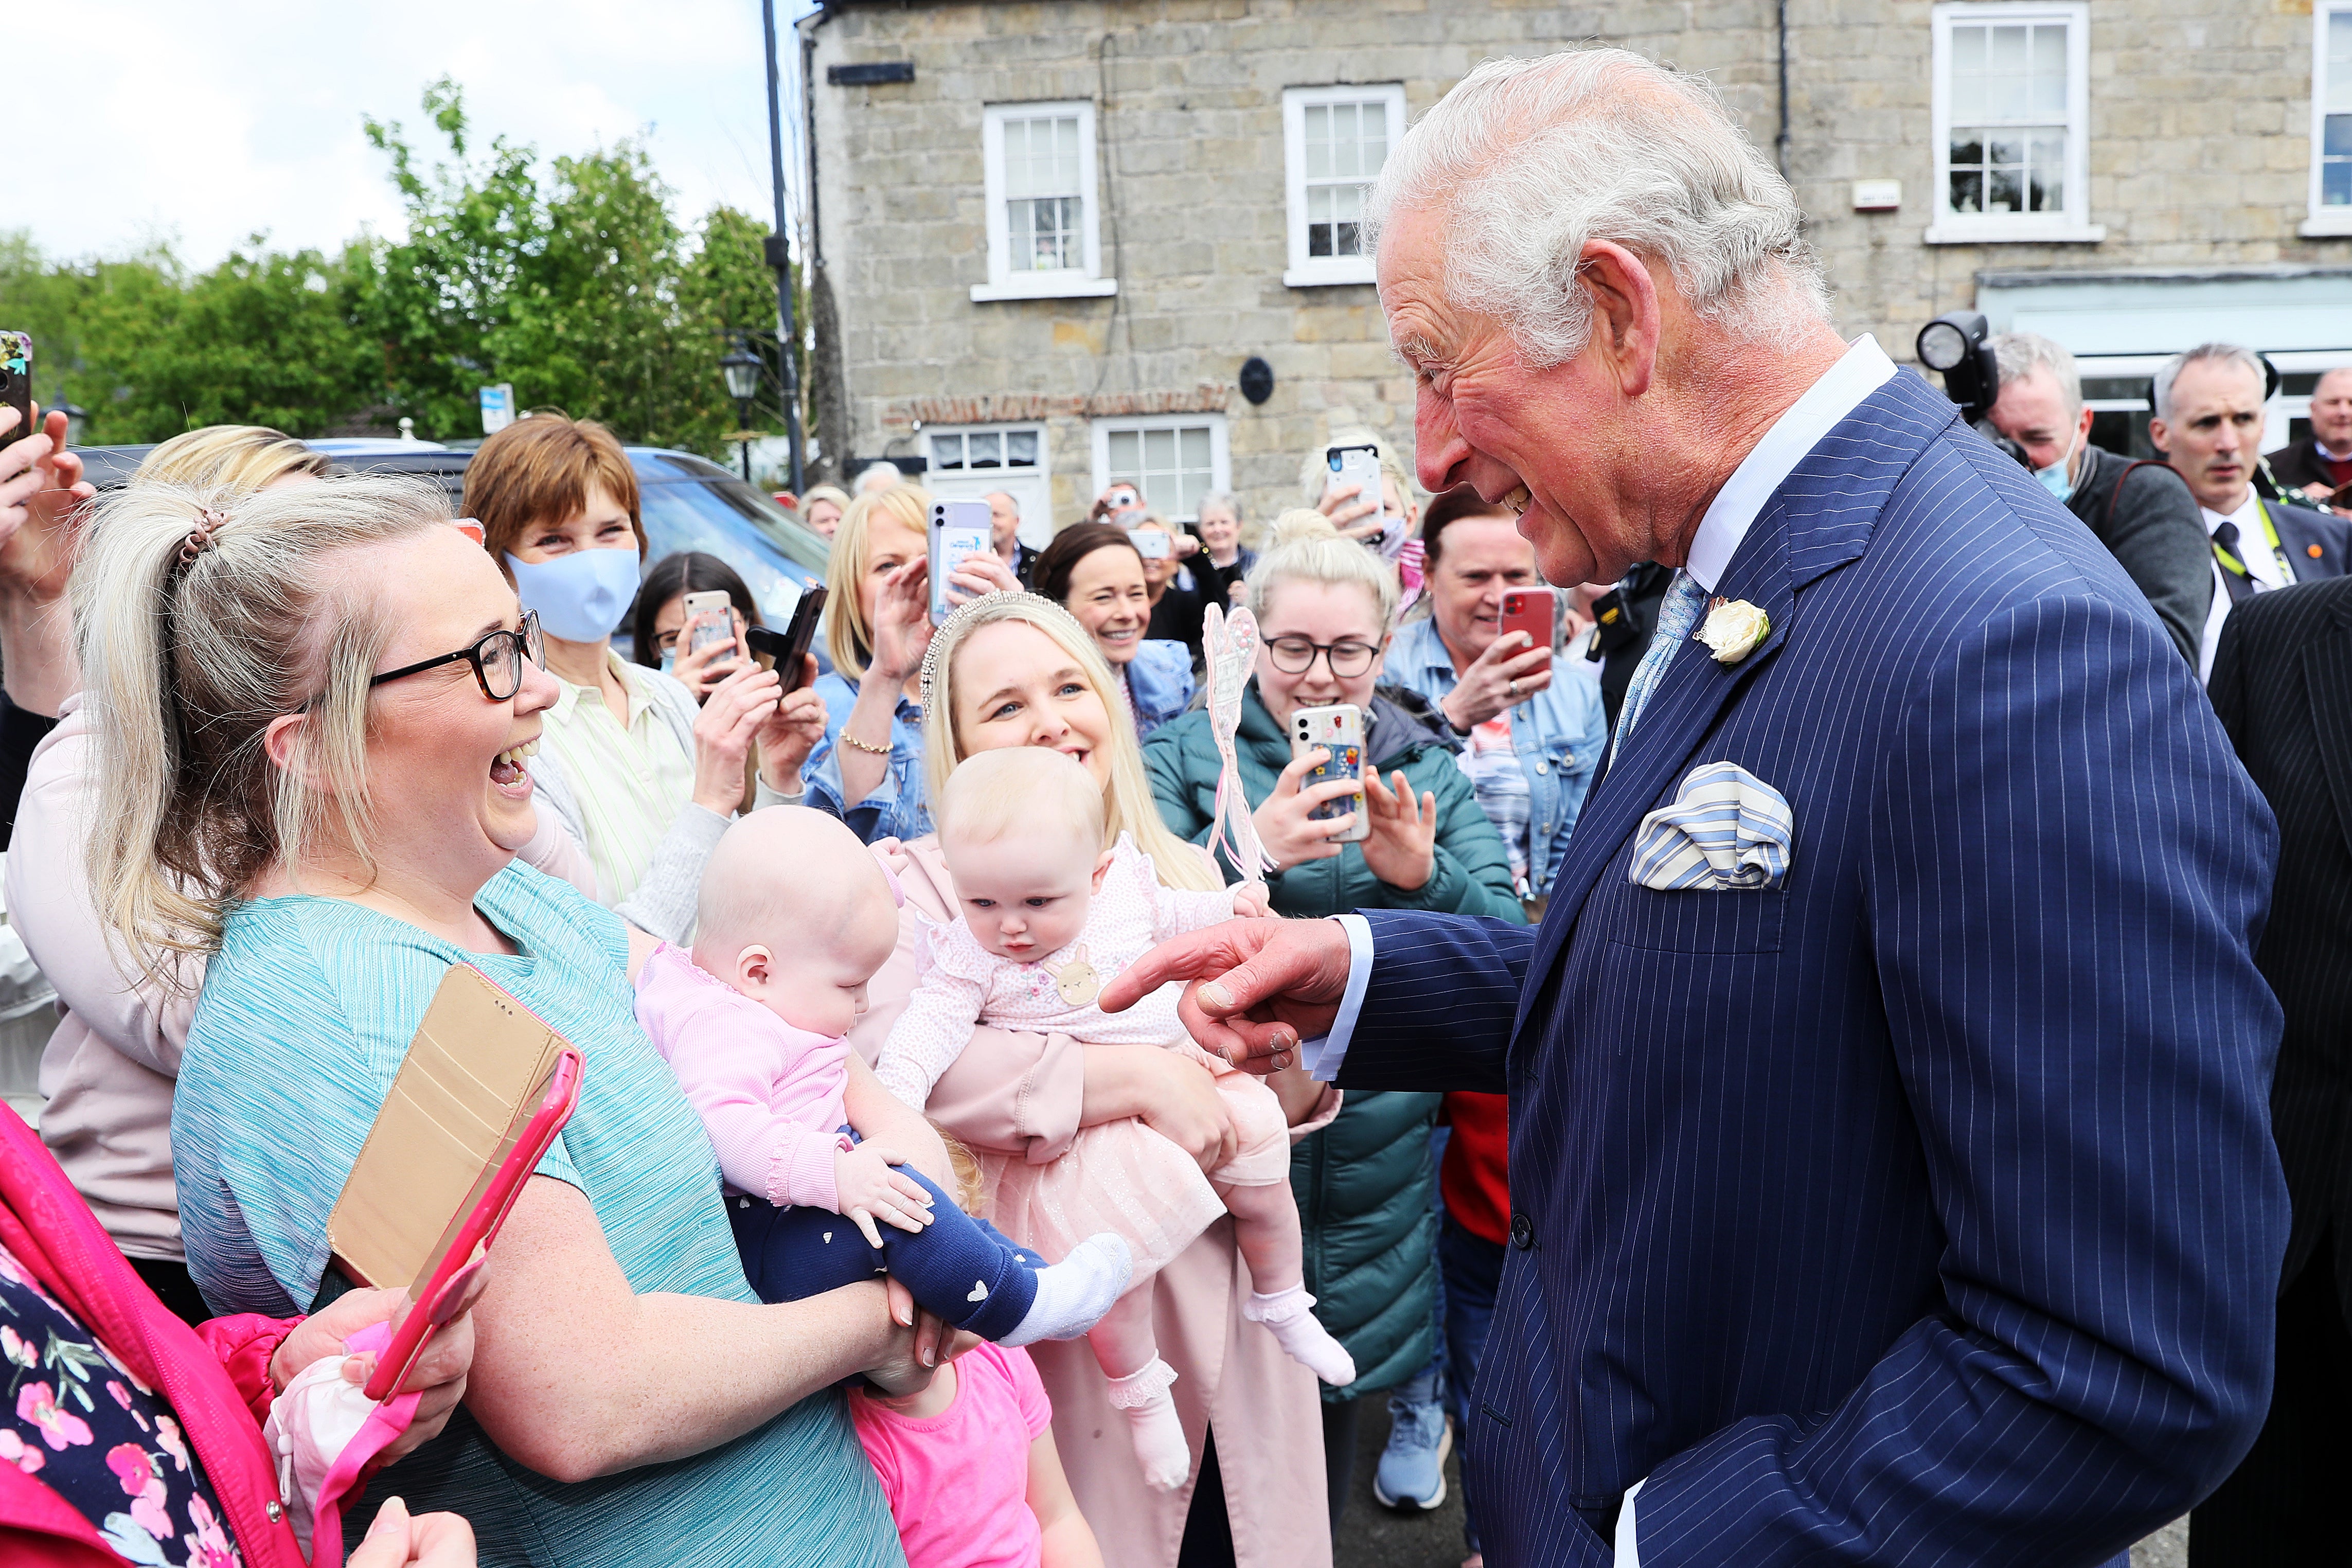 The Prince of Wales met Nicola Morton and her four-month-old daughter Evie (left) and Cathryn Grant and her seven-month-old daughter Sophia, during his visit to Caledon village in May (Brain Lawless/PA)